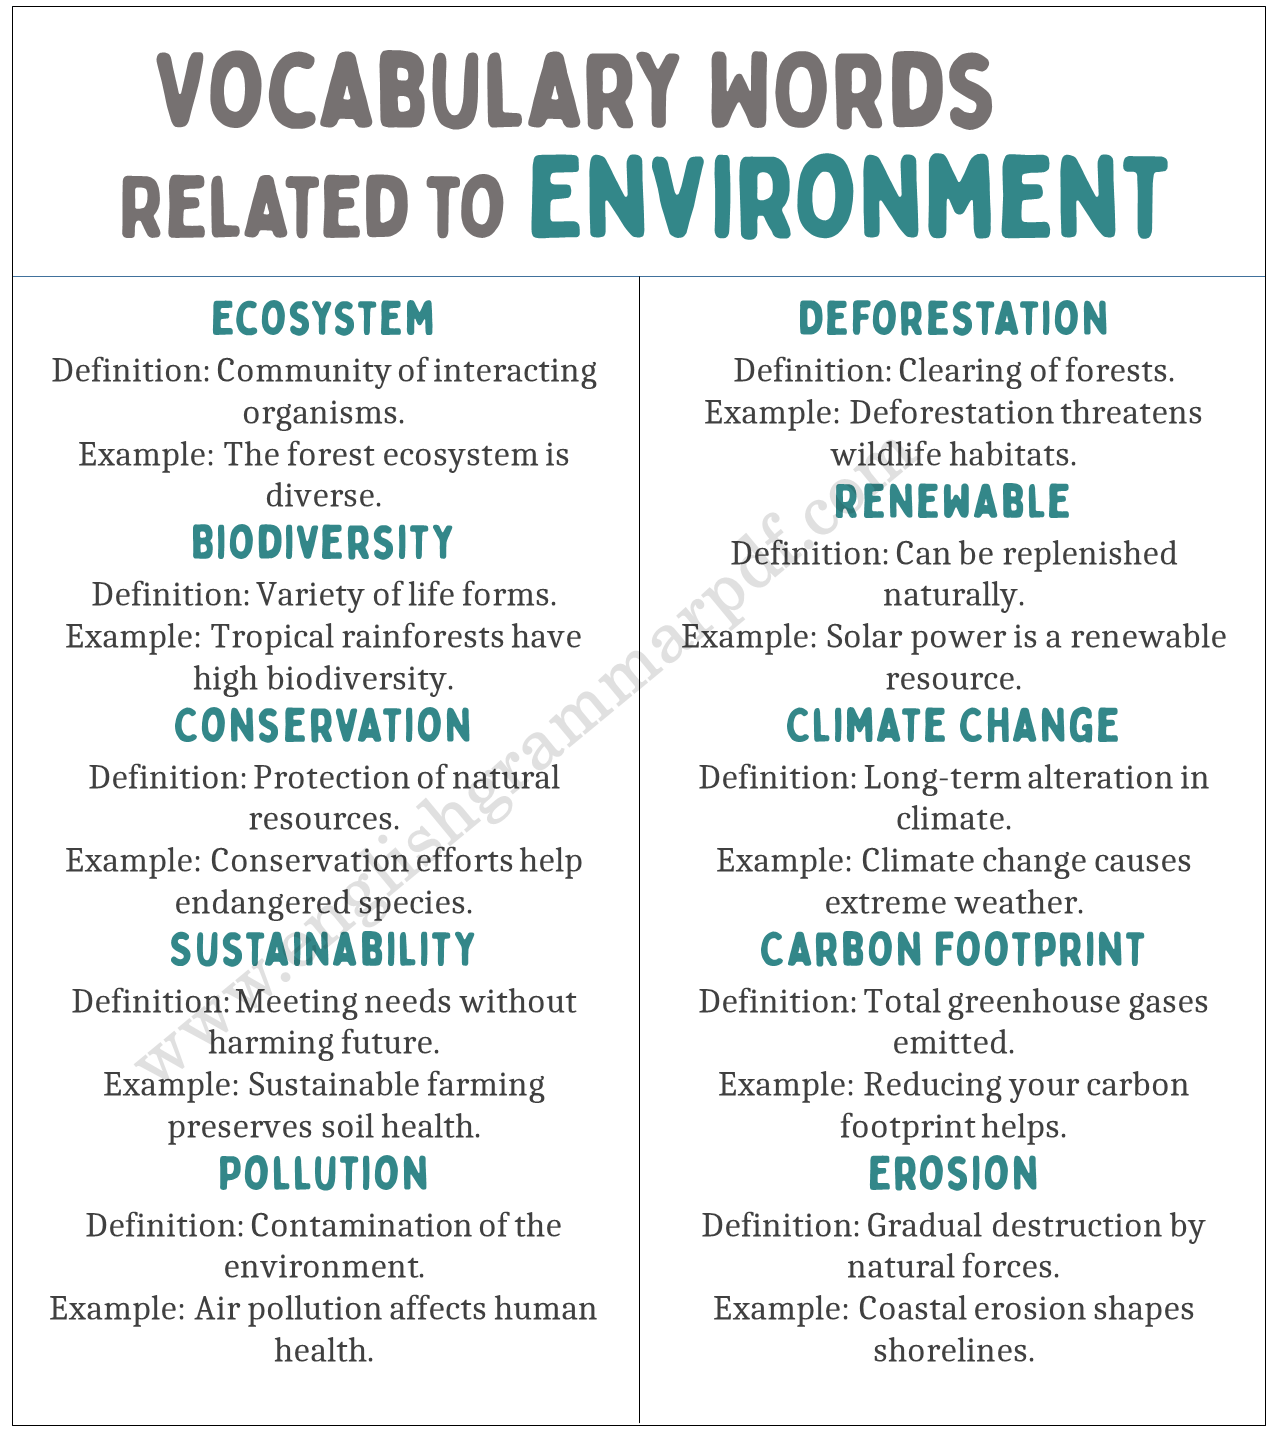 Vocabulary Words Related to Environment